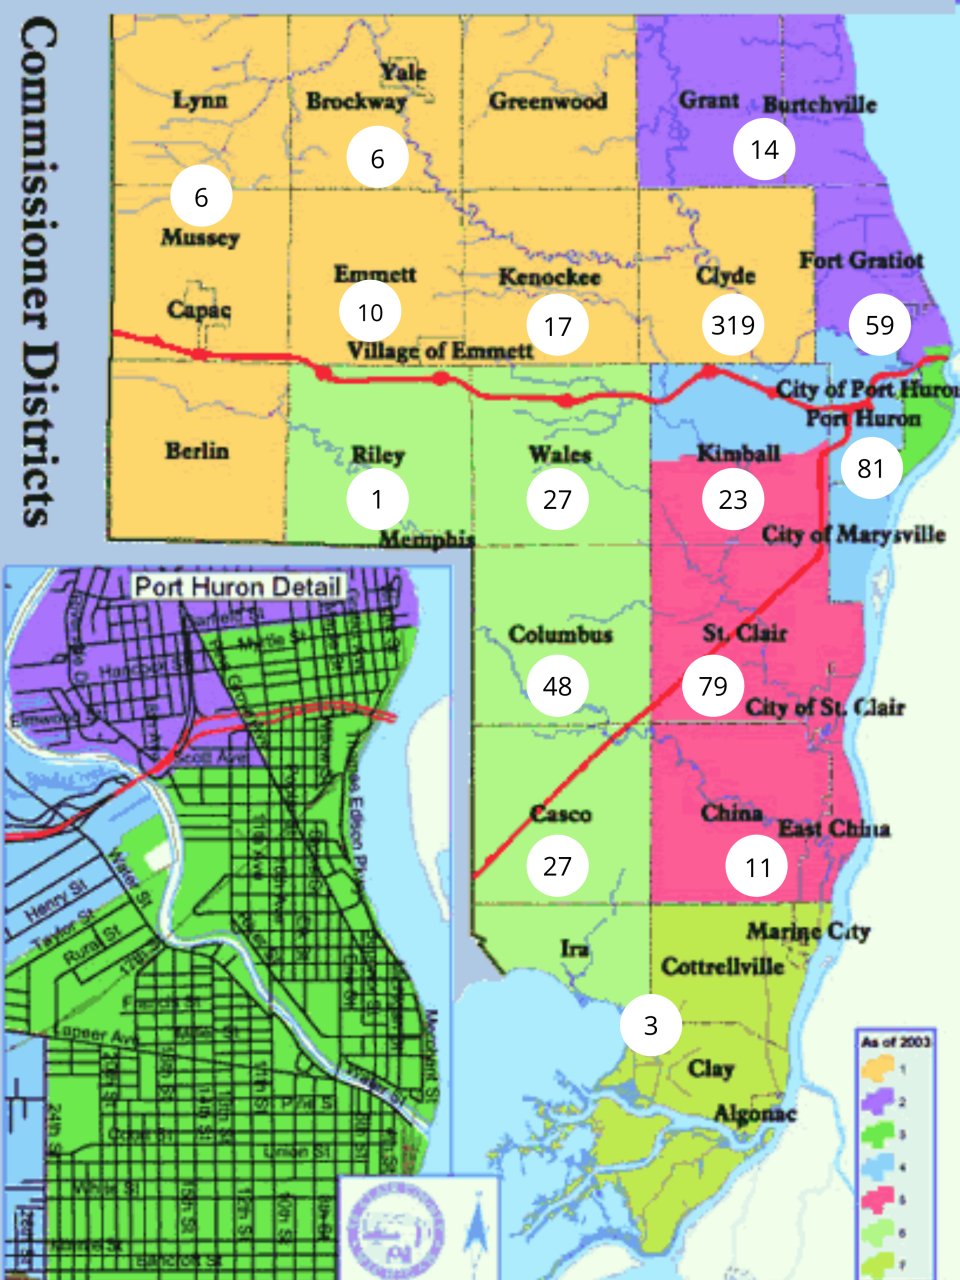 A map from Friends of the St. Clair River shows St. Clair County's 750 gypsy moth reports broken down by community and commissioner district.